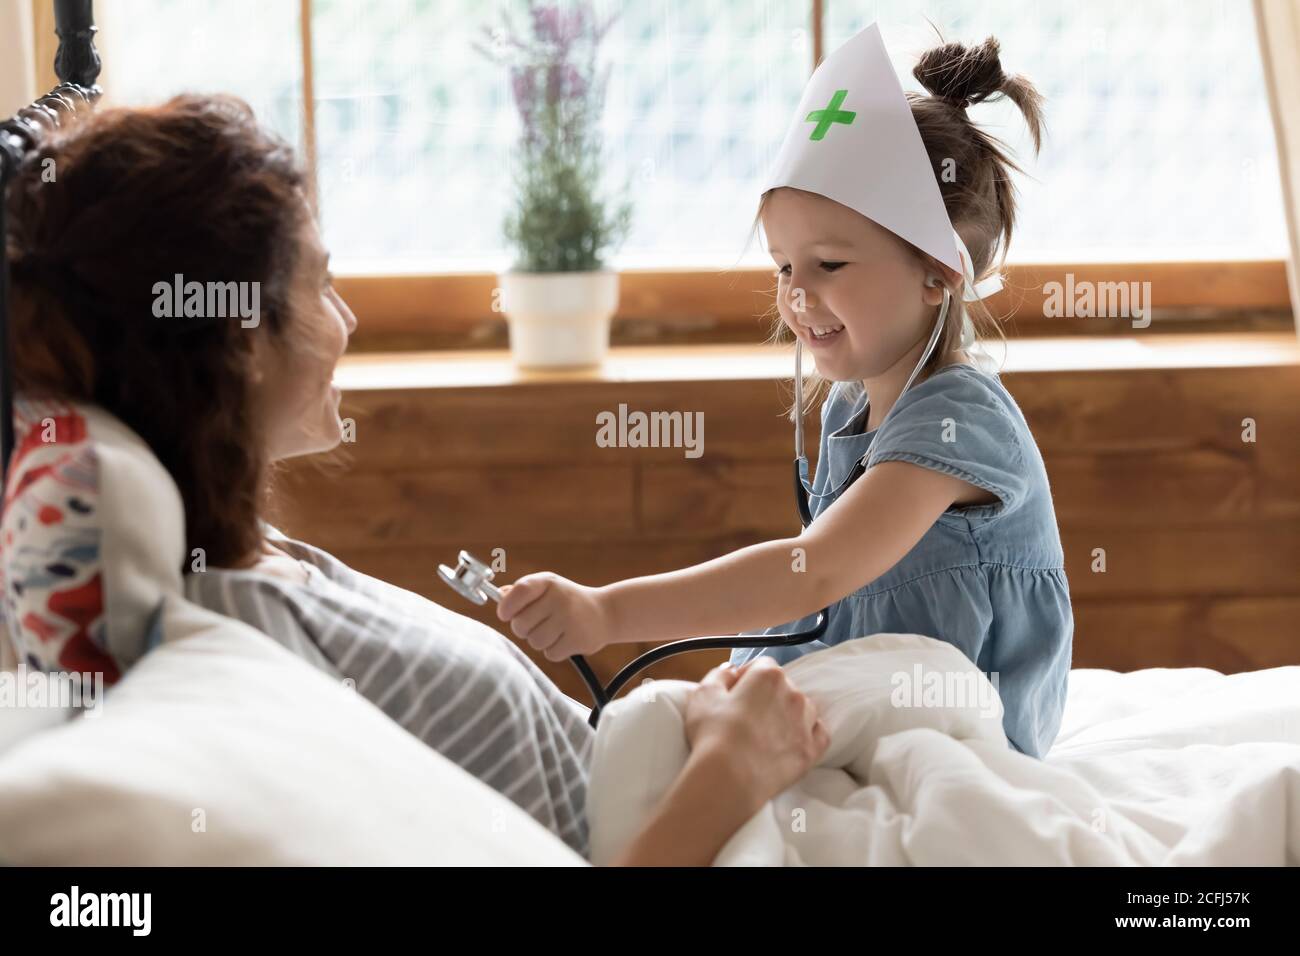 Daughter holds stethoscope imagines herself doctor listen mother heartbeat Stock Photo